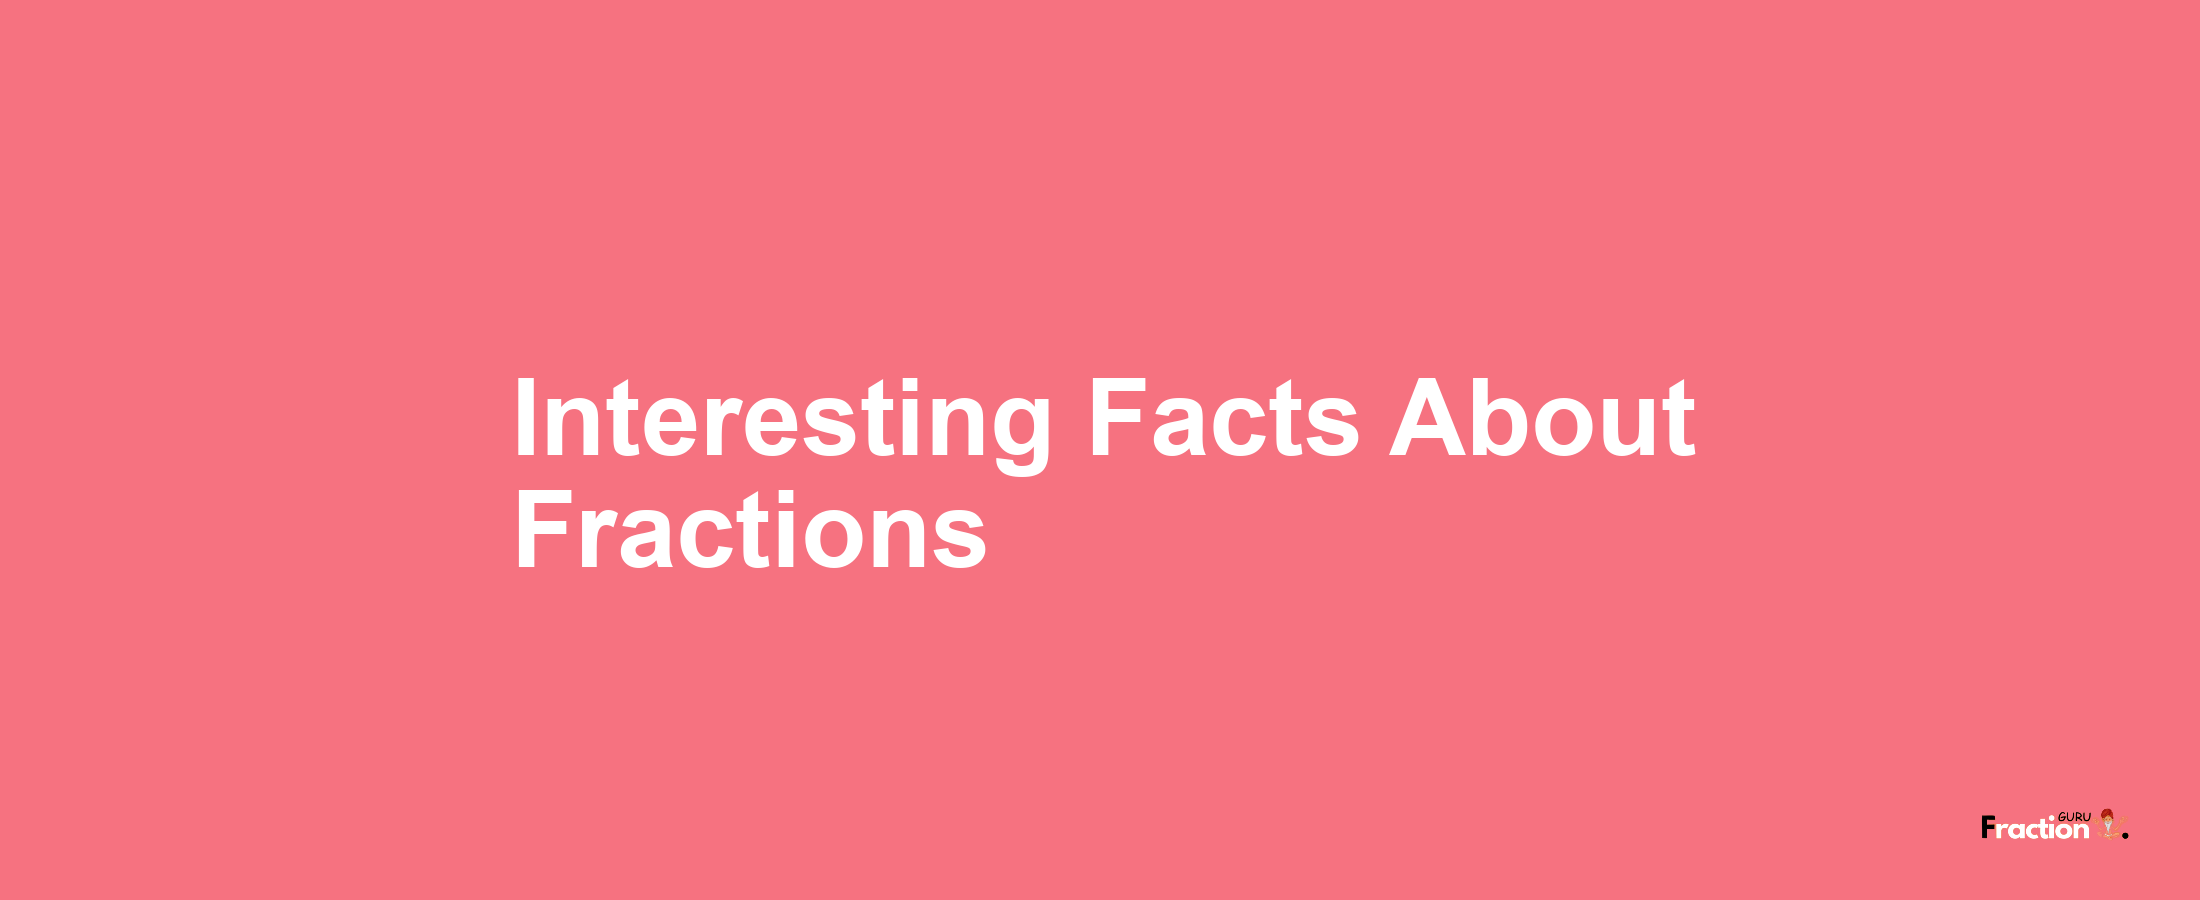 Interesting Facts About Fractions